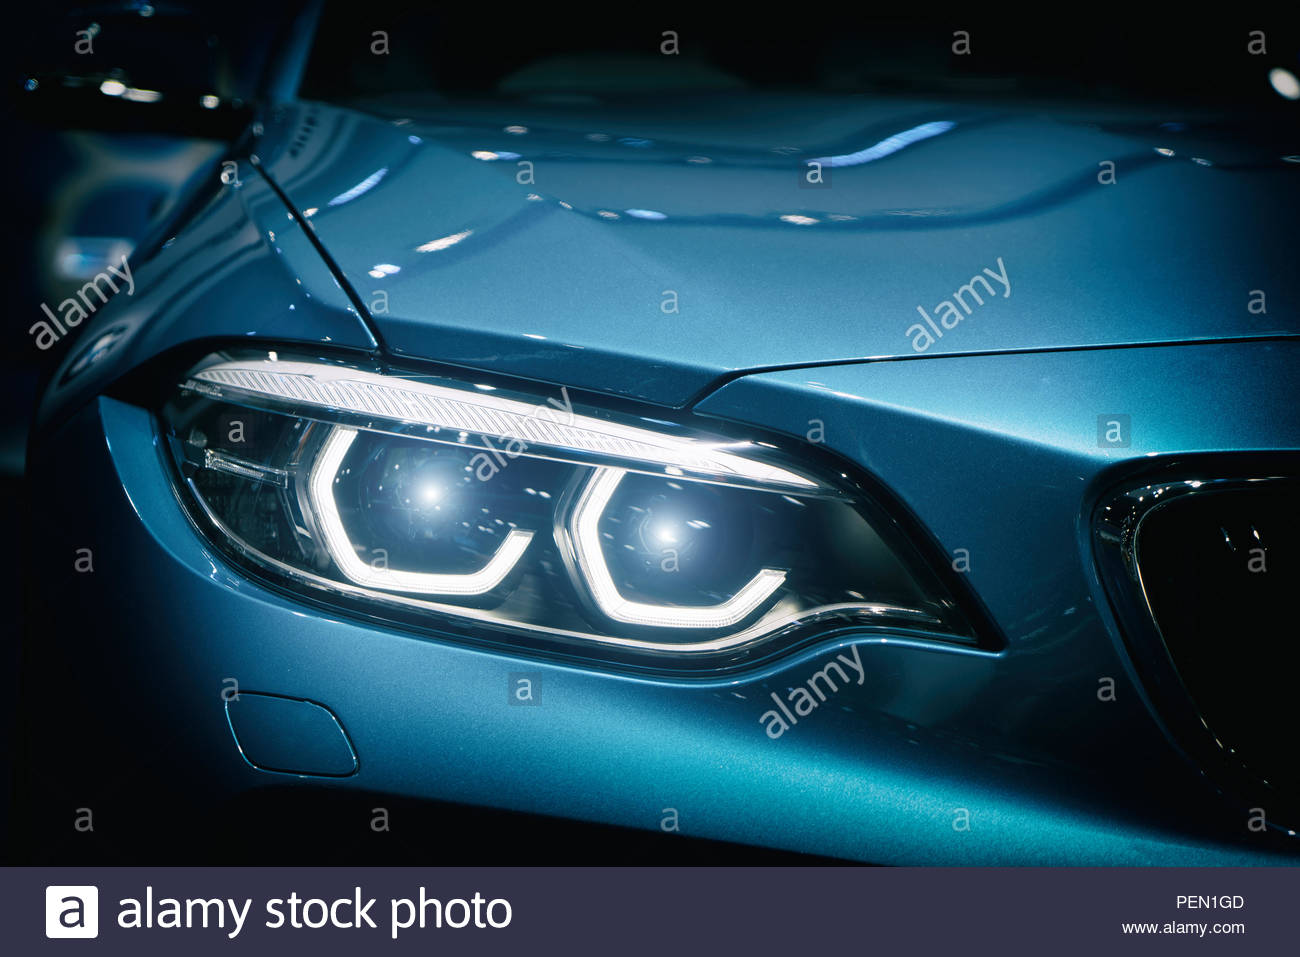 Car Headlight And Hood Of Powerful Sports Blue With Glare